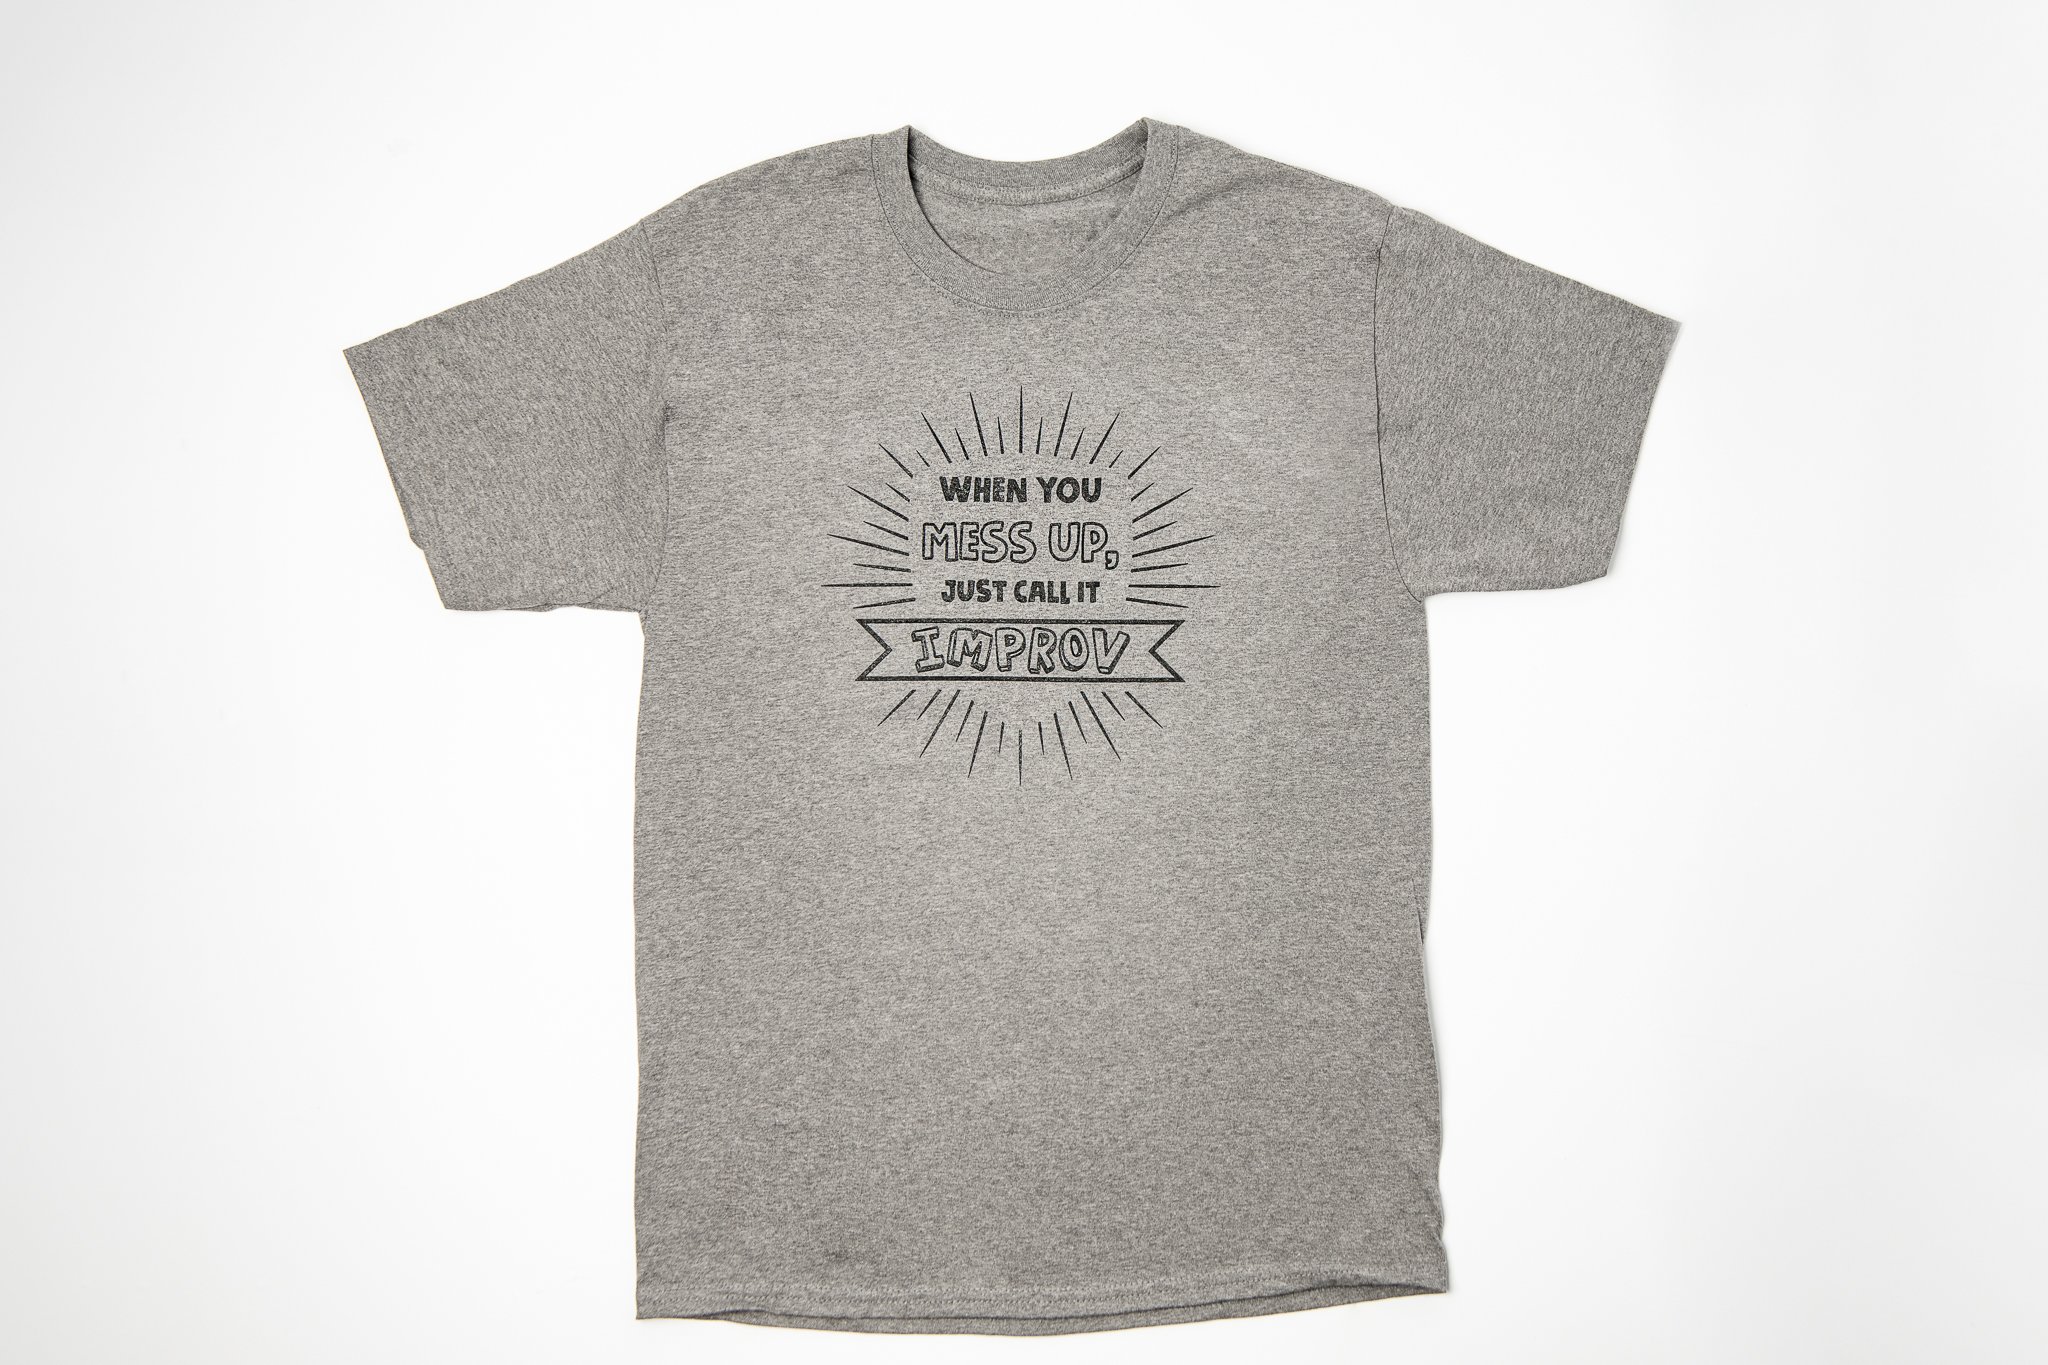 Our Motto on a t-shirt: "If you mess up, just call it Improv!" Purchase one in our online store!